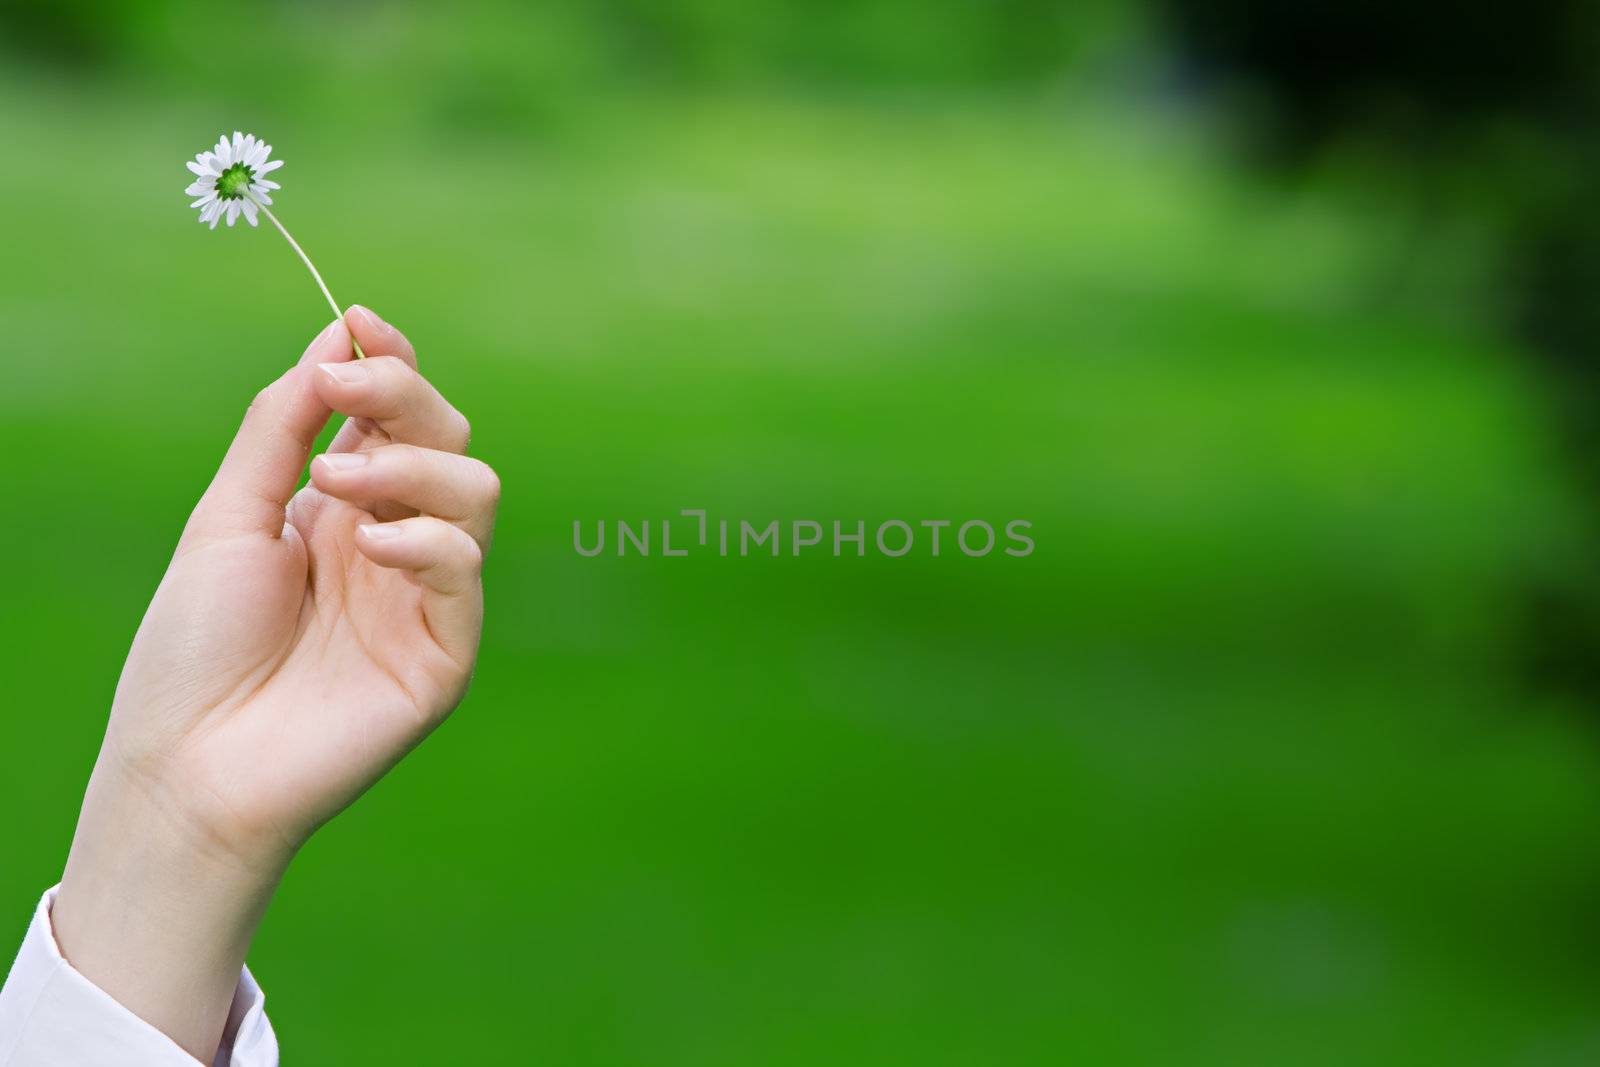 Female hands holding a fragile daisy against a green grass background, environmental theme